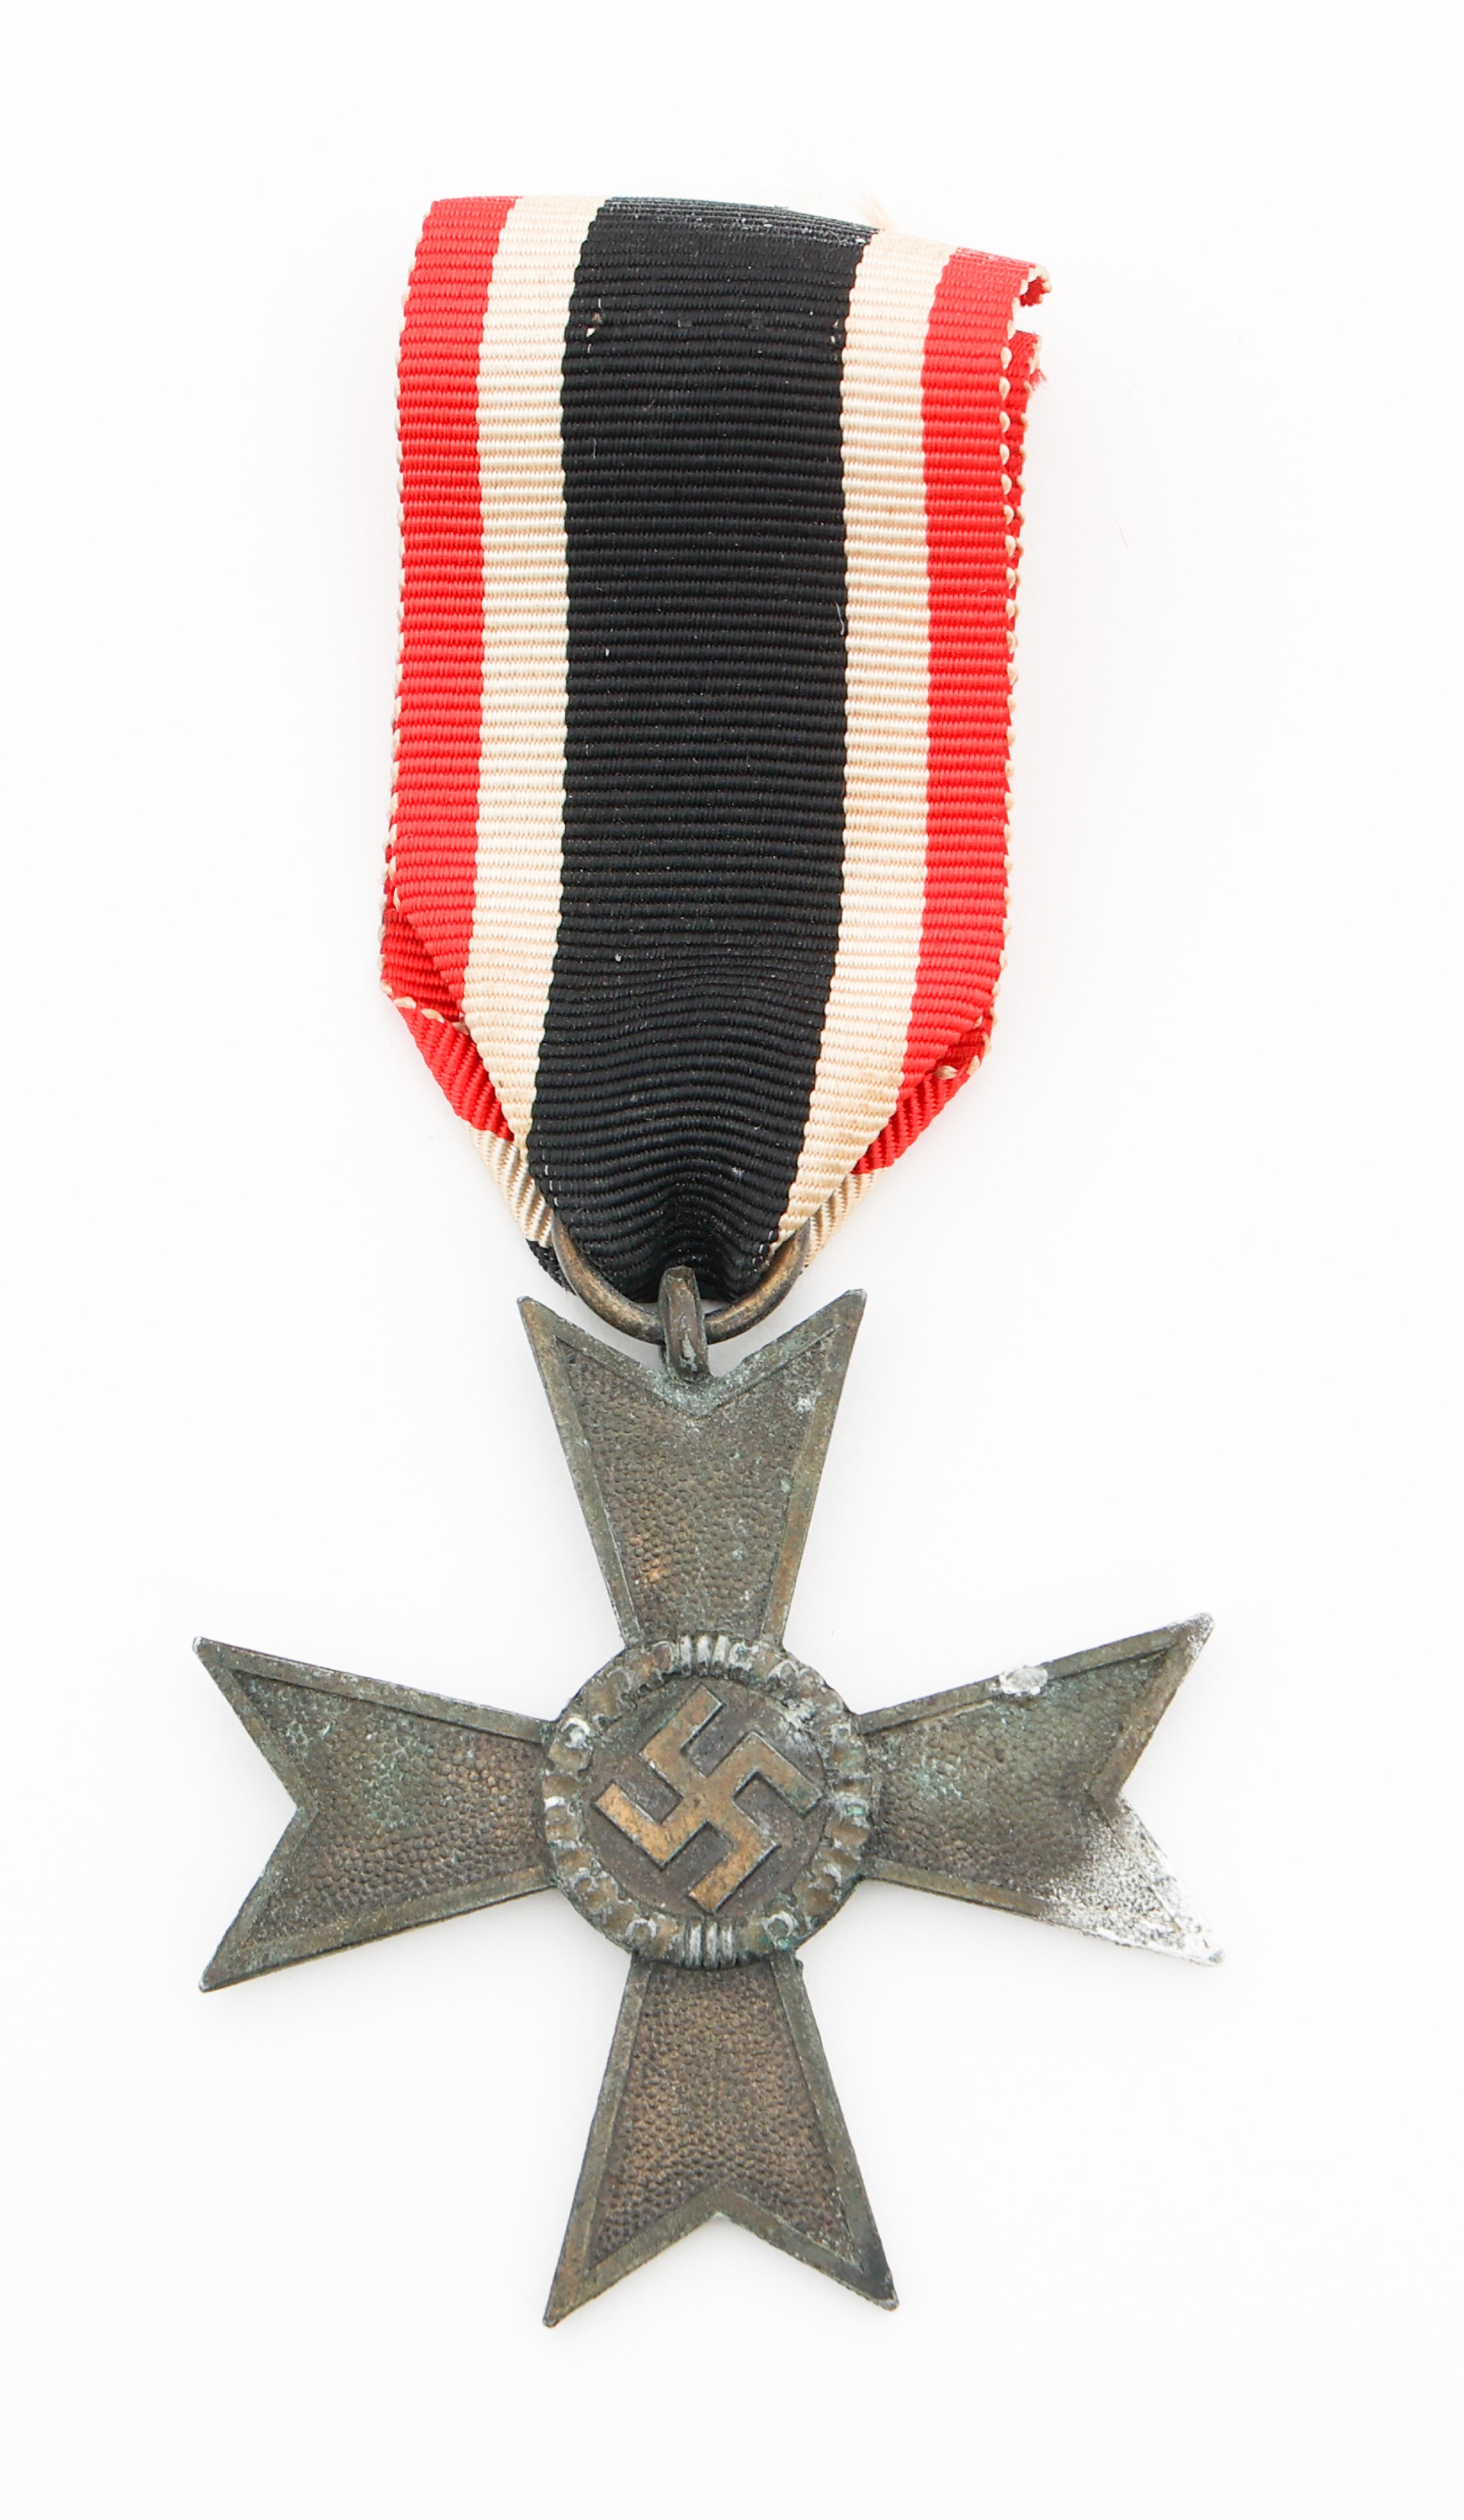 WWII GERMAN INDUSTRY MEDALLION & MEDALS